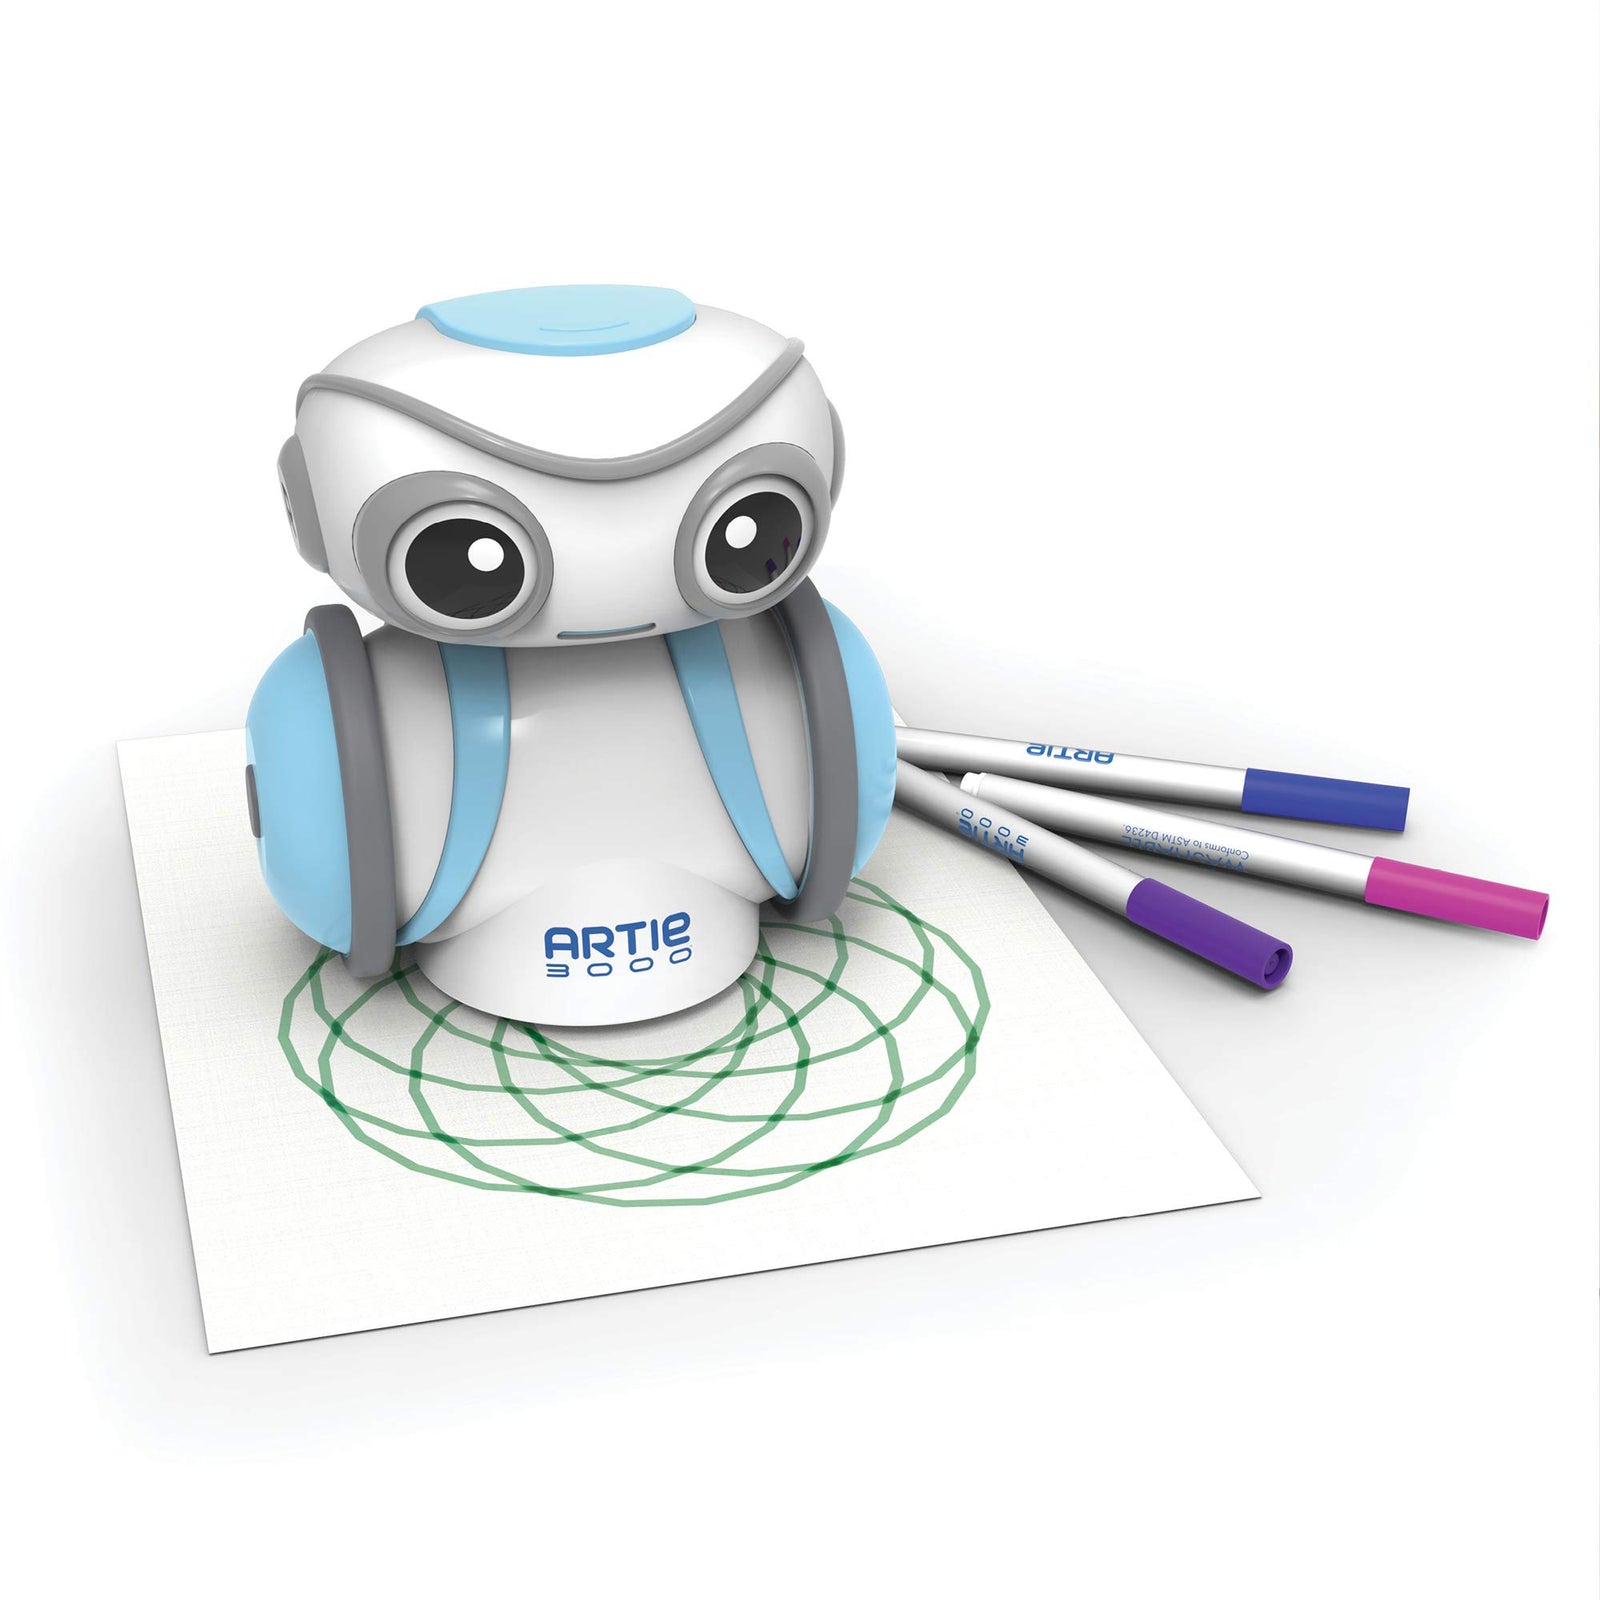 Educational Insights Artie 3000 The Coding Robot: Drawing Robot, Homeschool or Classroom, Ages 7+